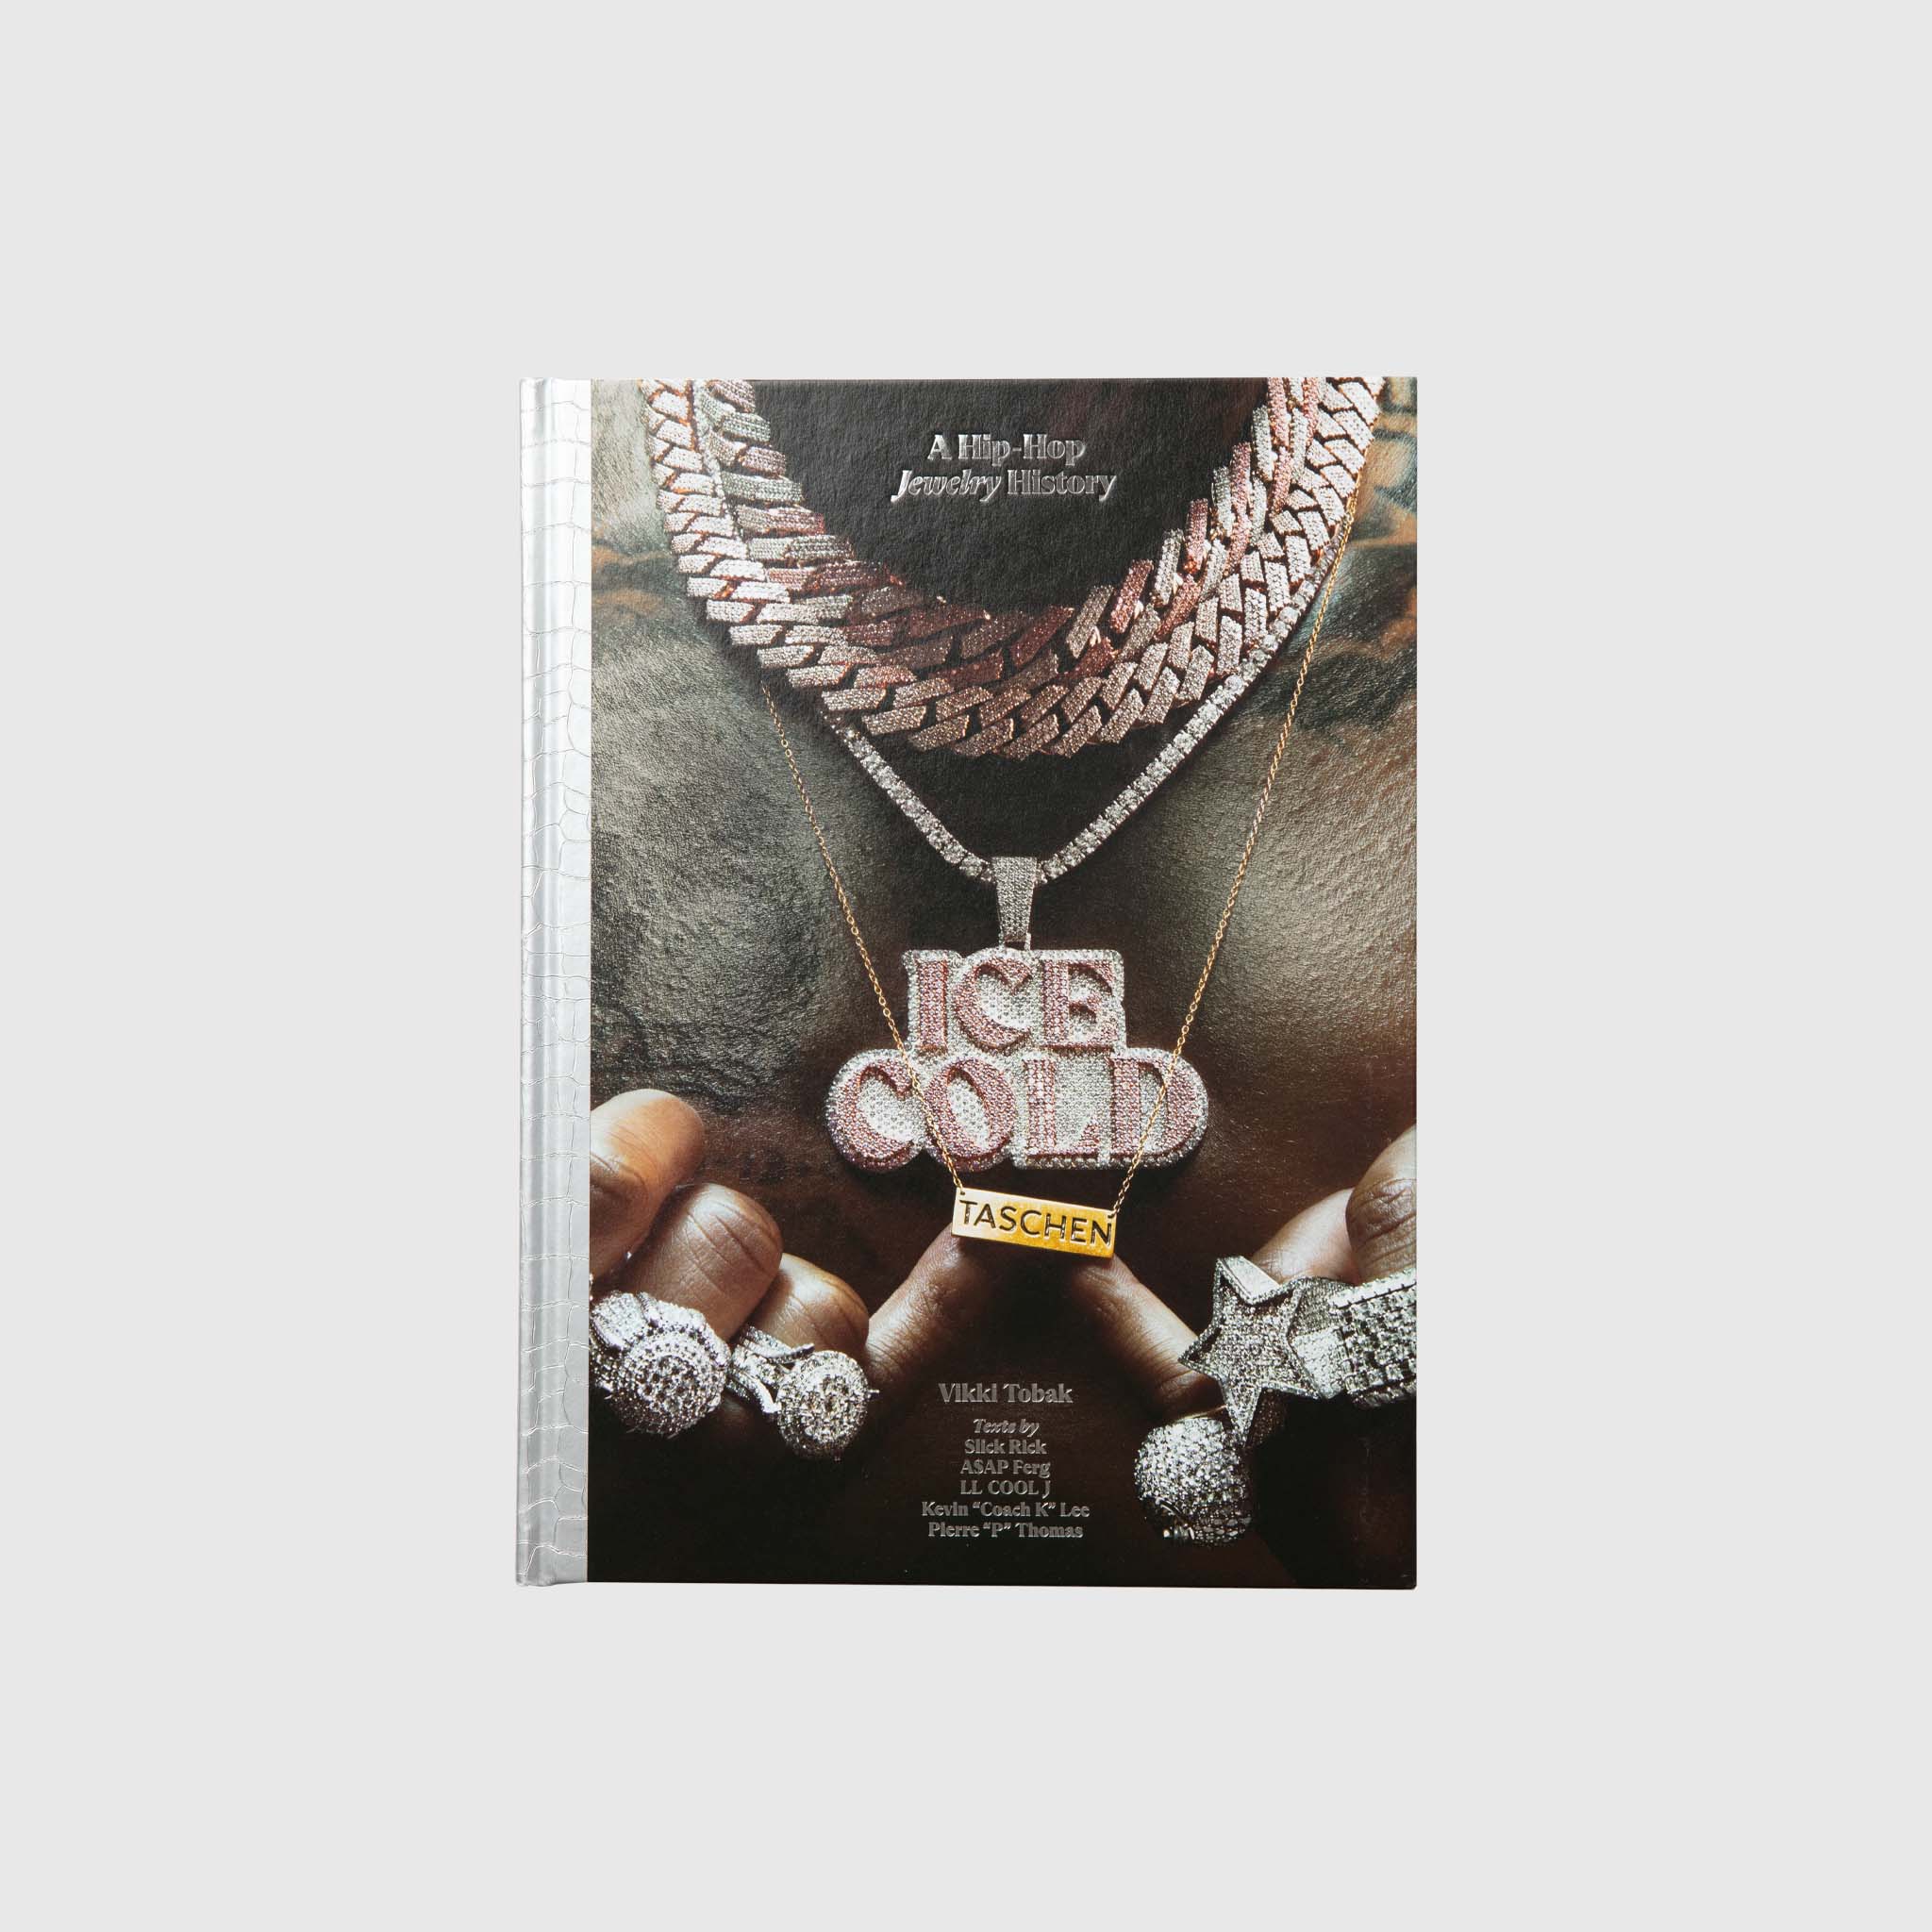 The ice pack: how hip-hop jewellery became big business